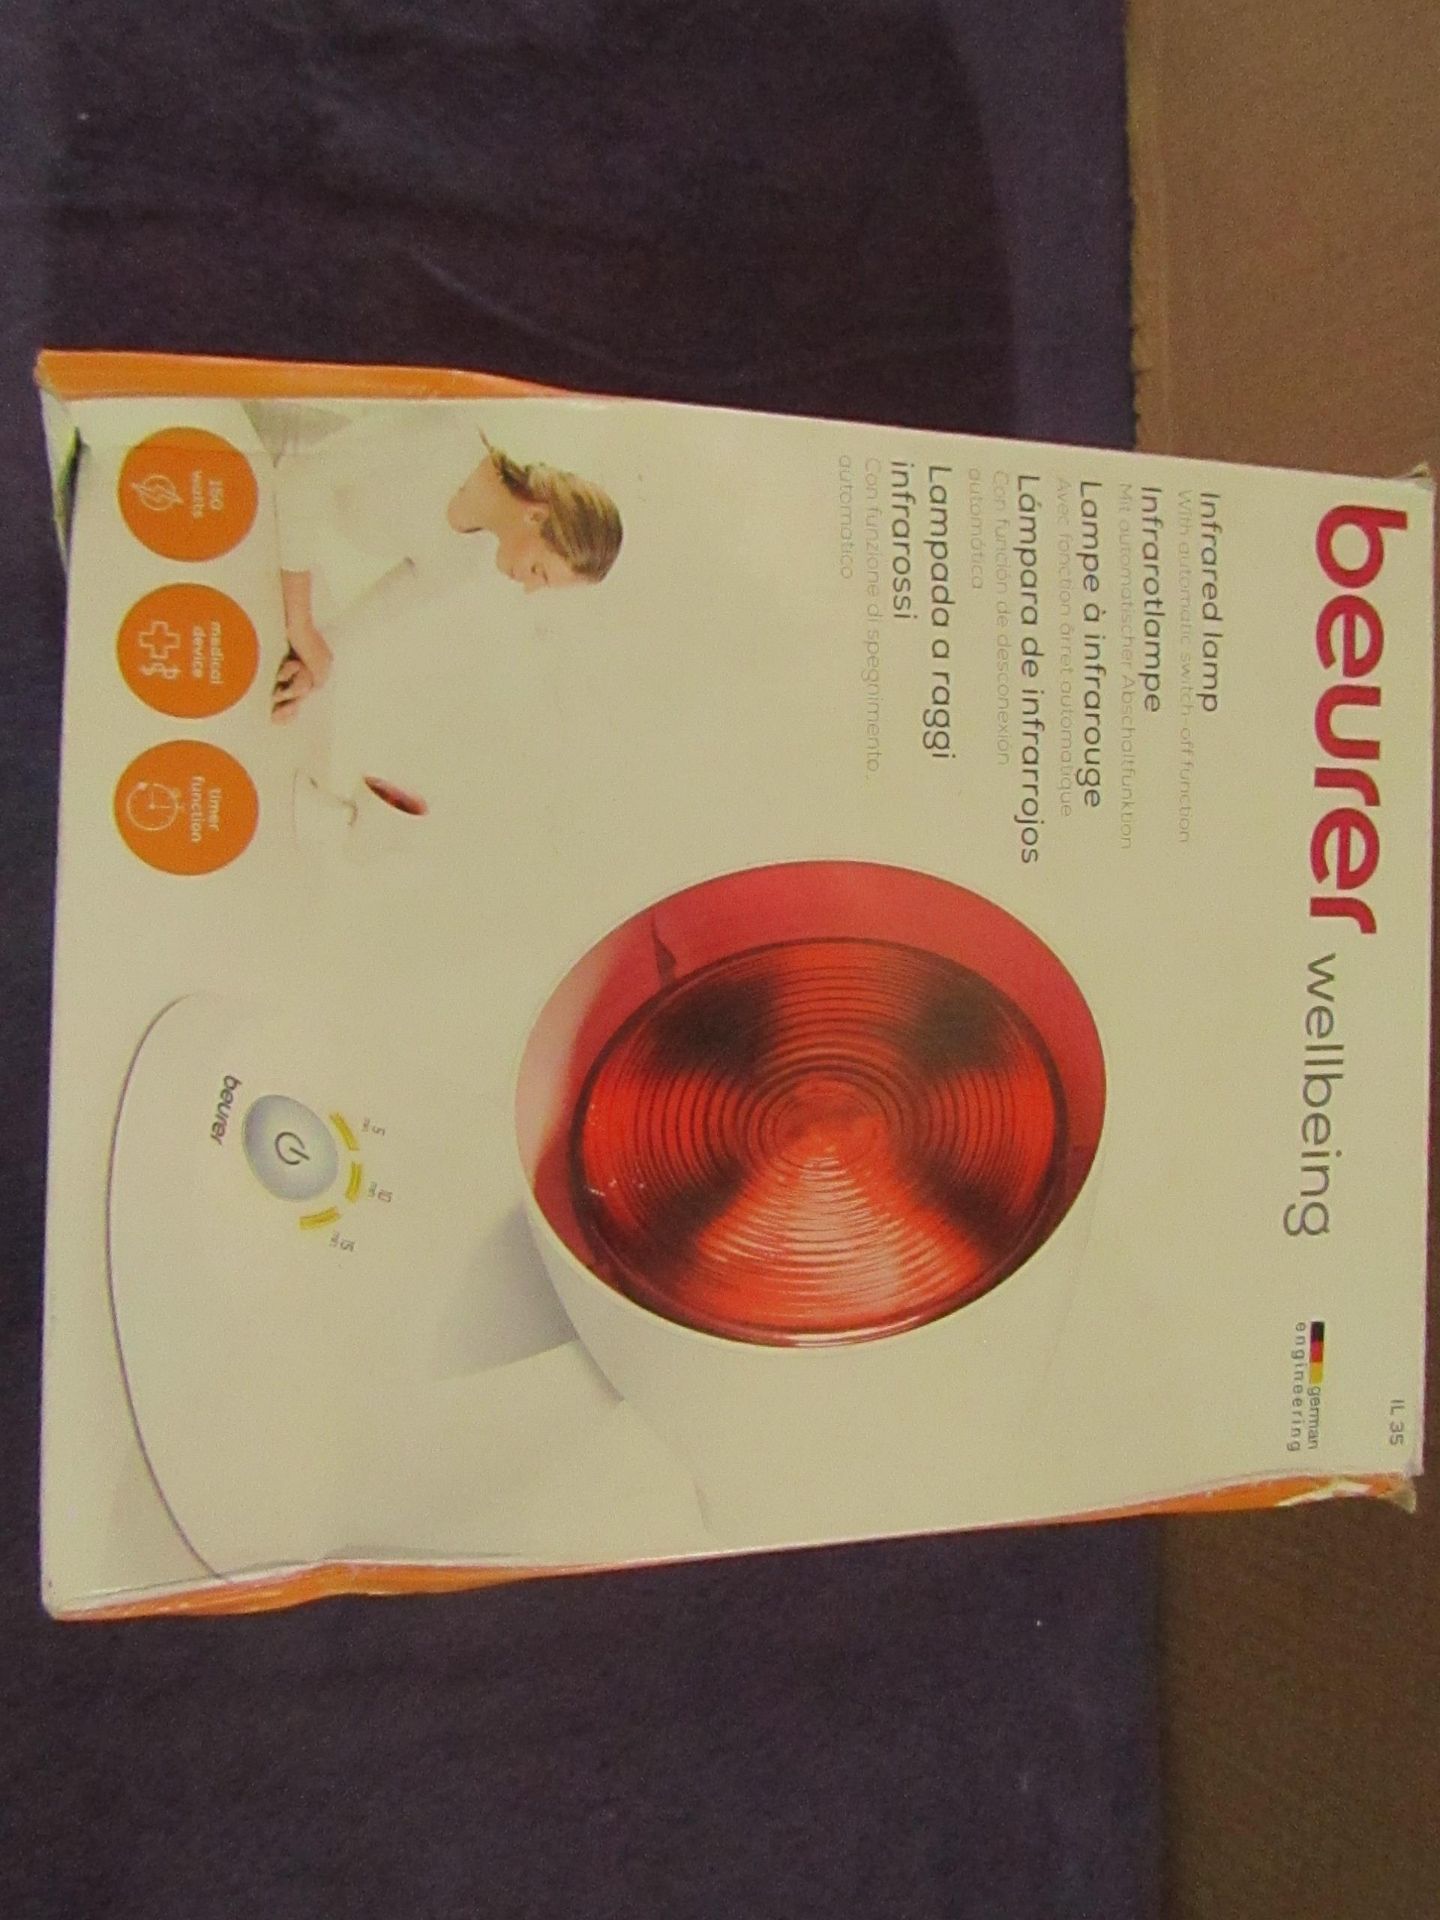 Beurer - Infrared Heat Lamp - IL35 - Untested & Boxed. RRP £62.